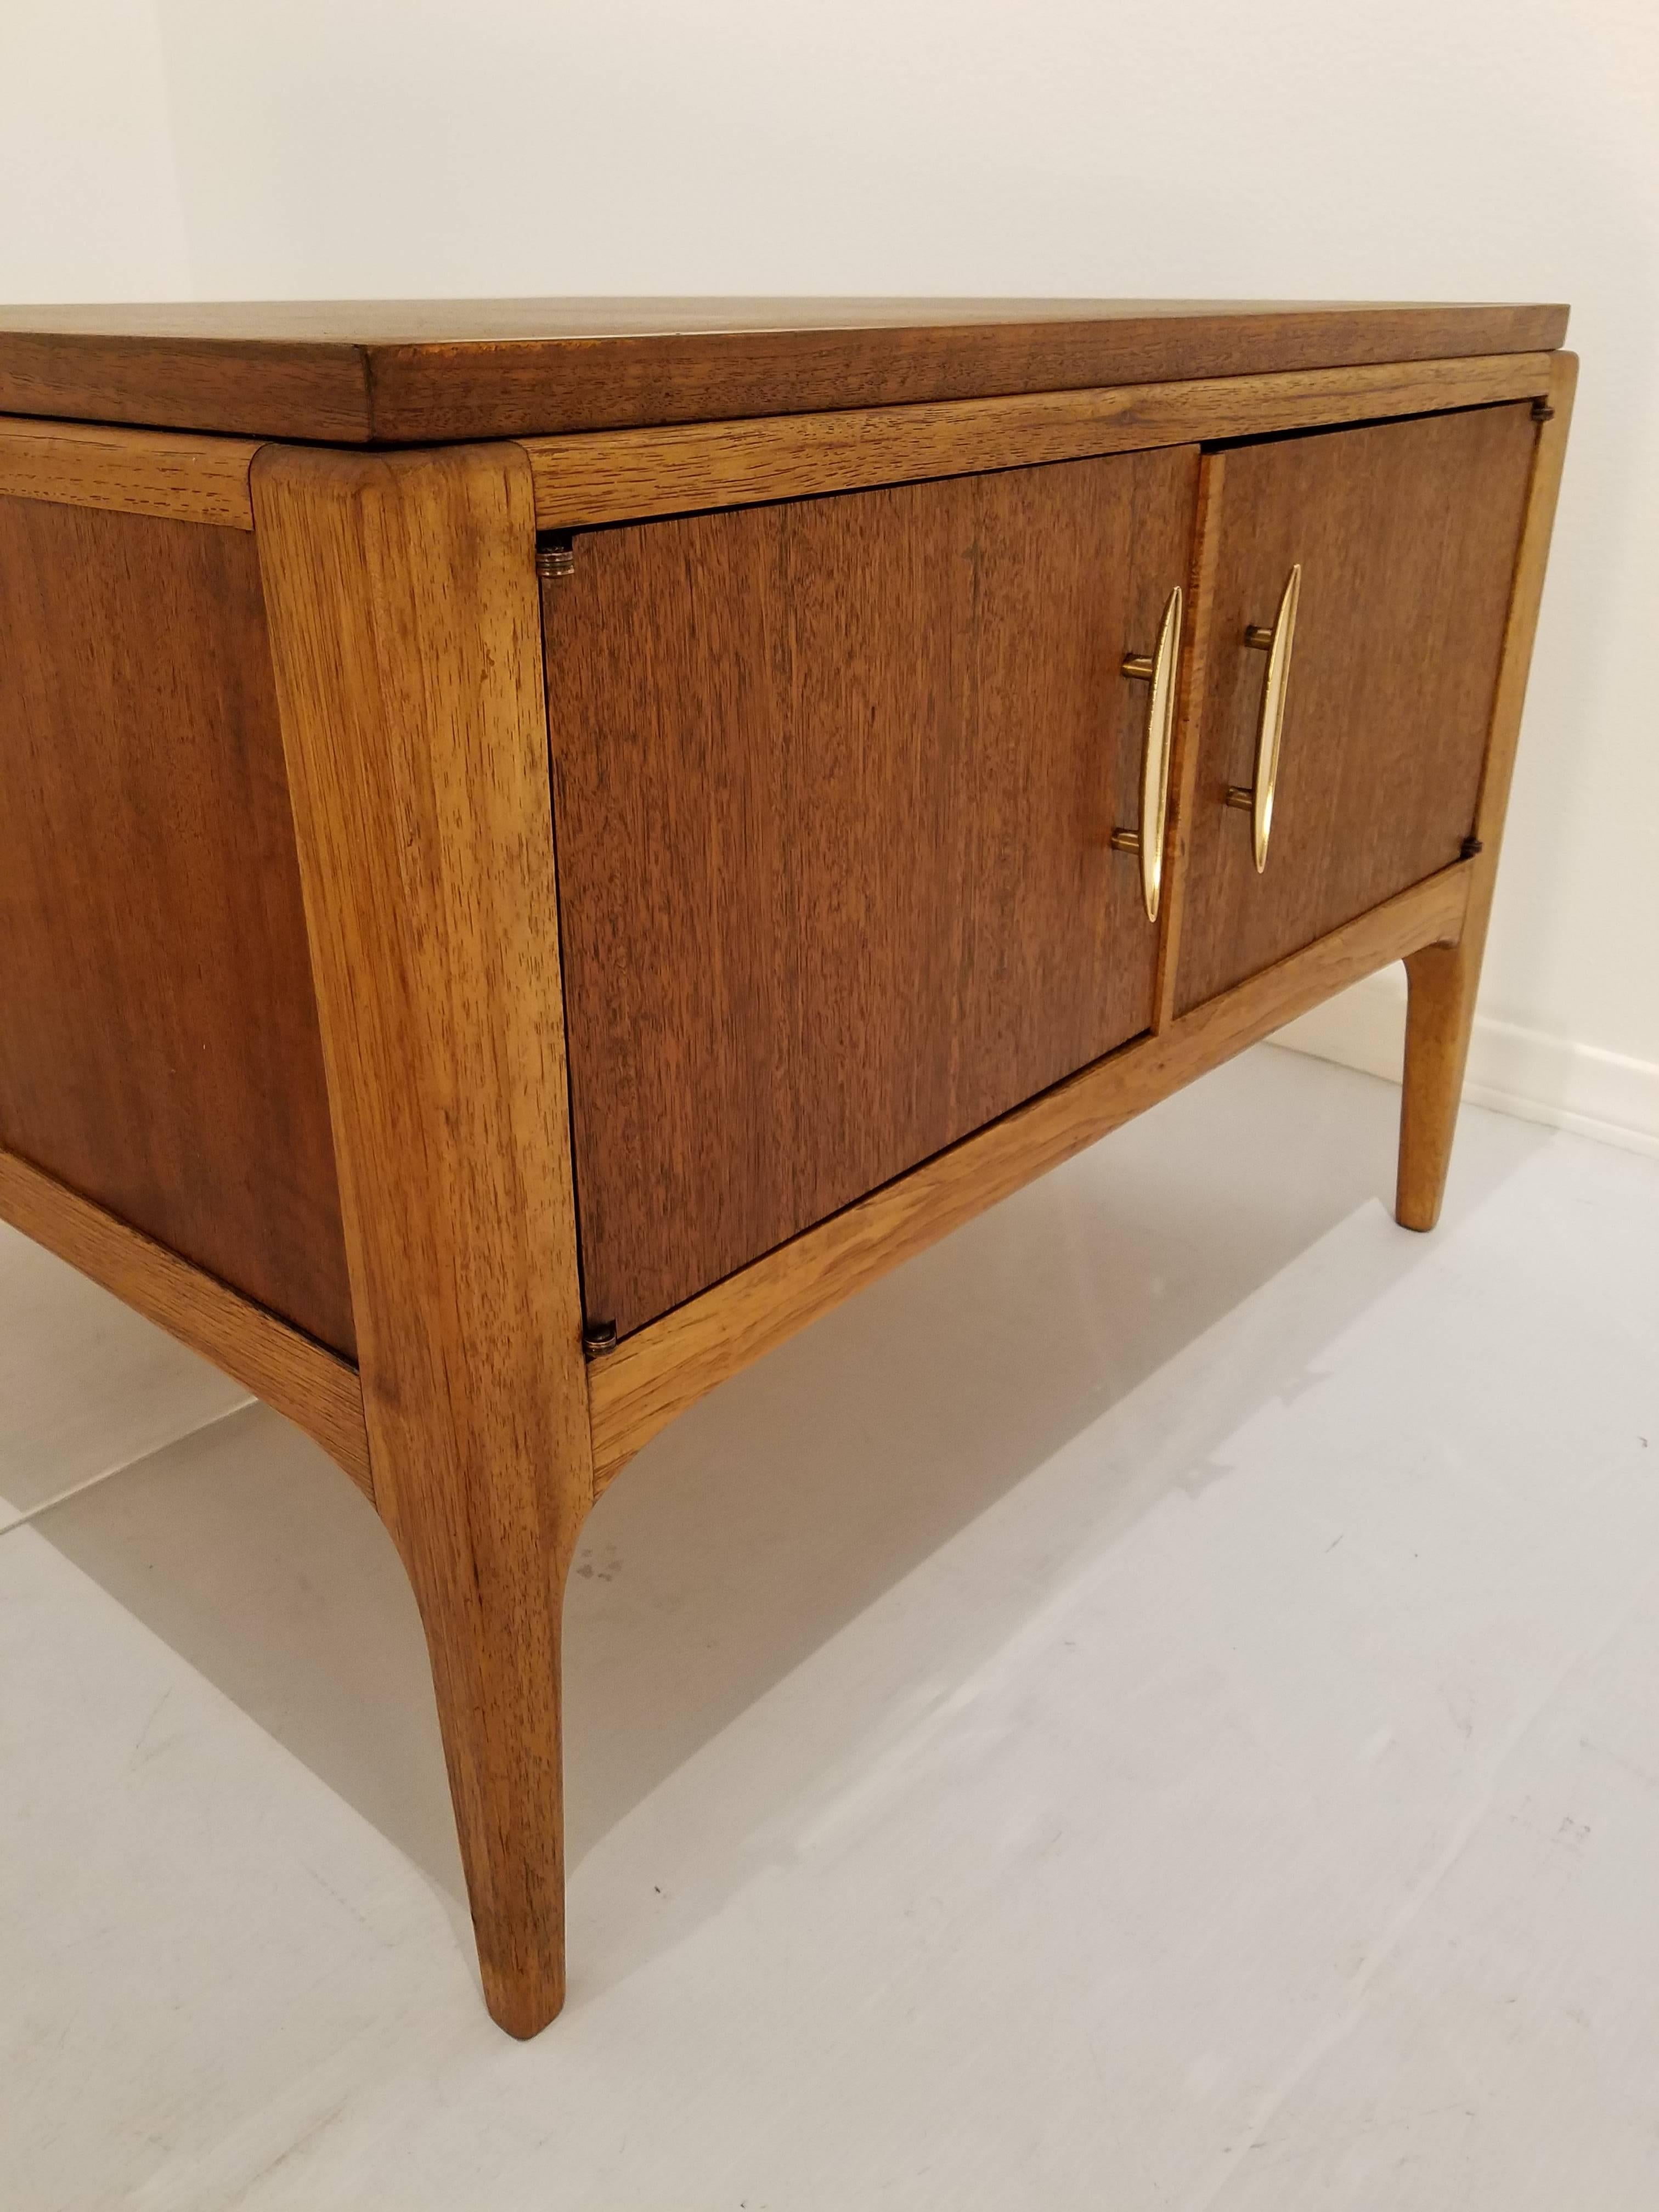 Walnut American Mid-Century Modern Square End Table Cabinet by Lane